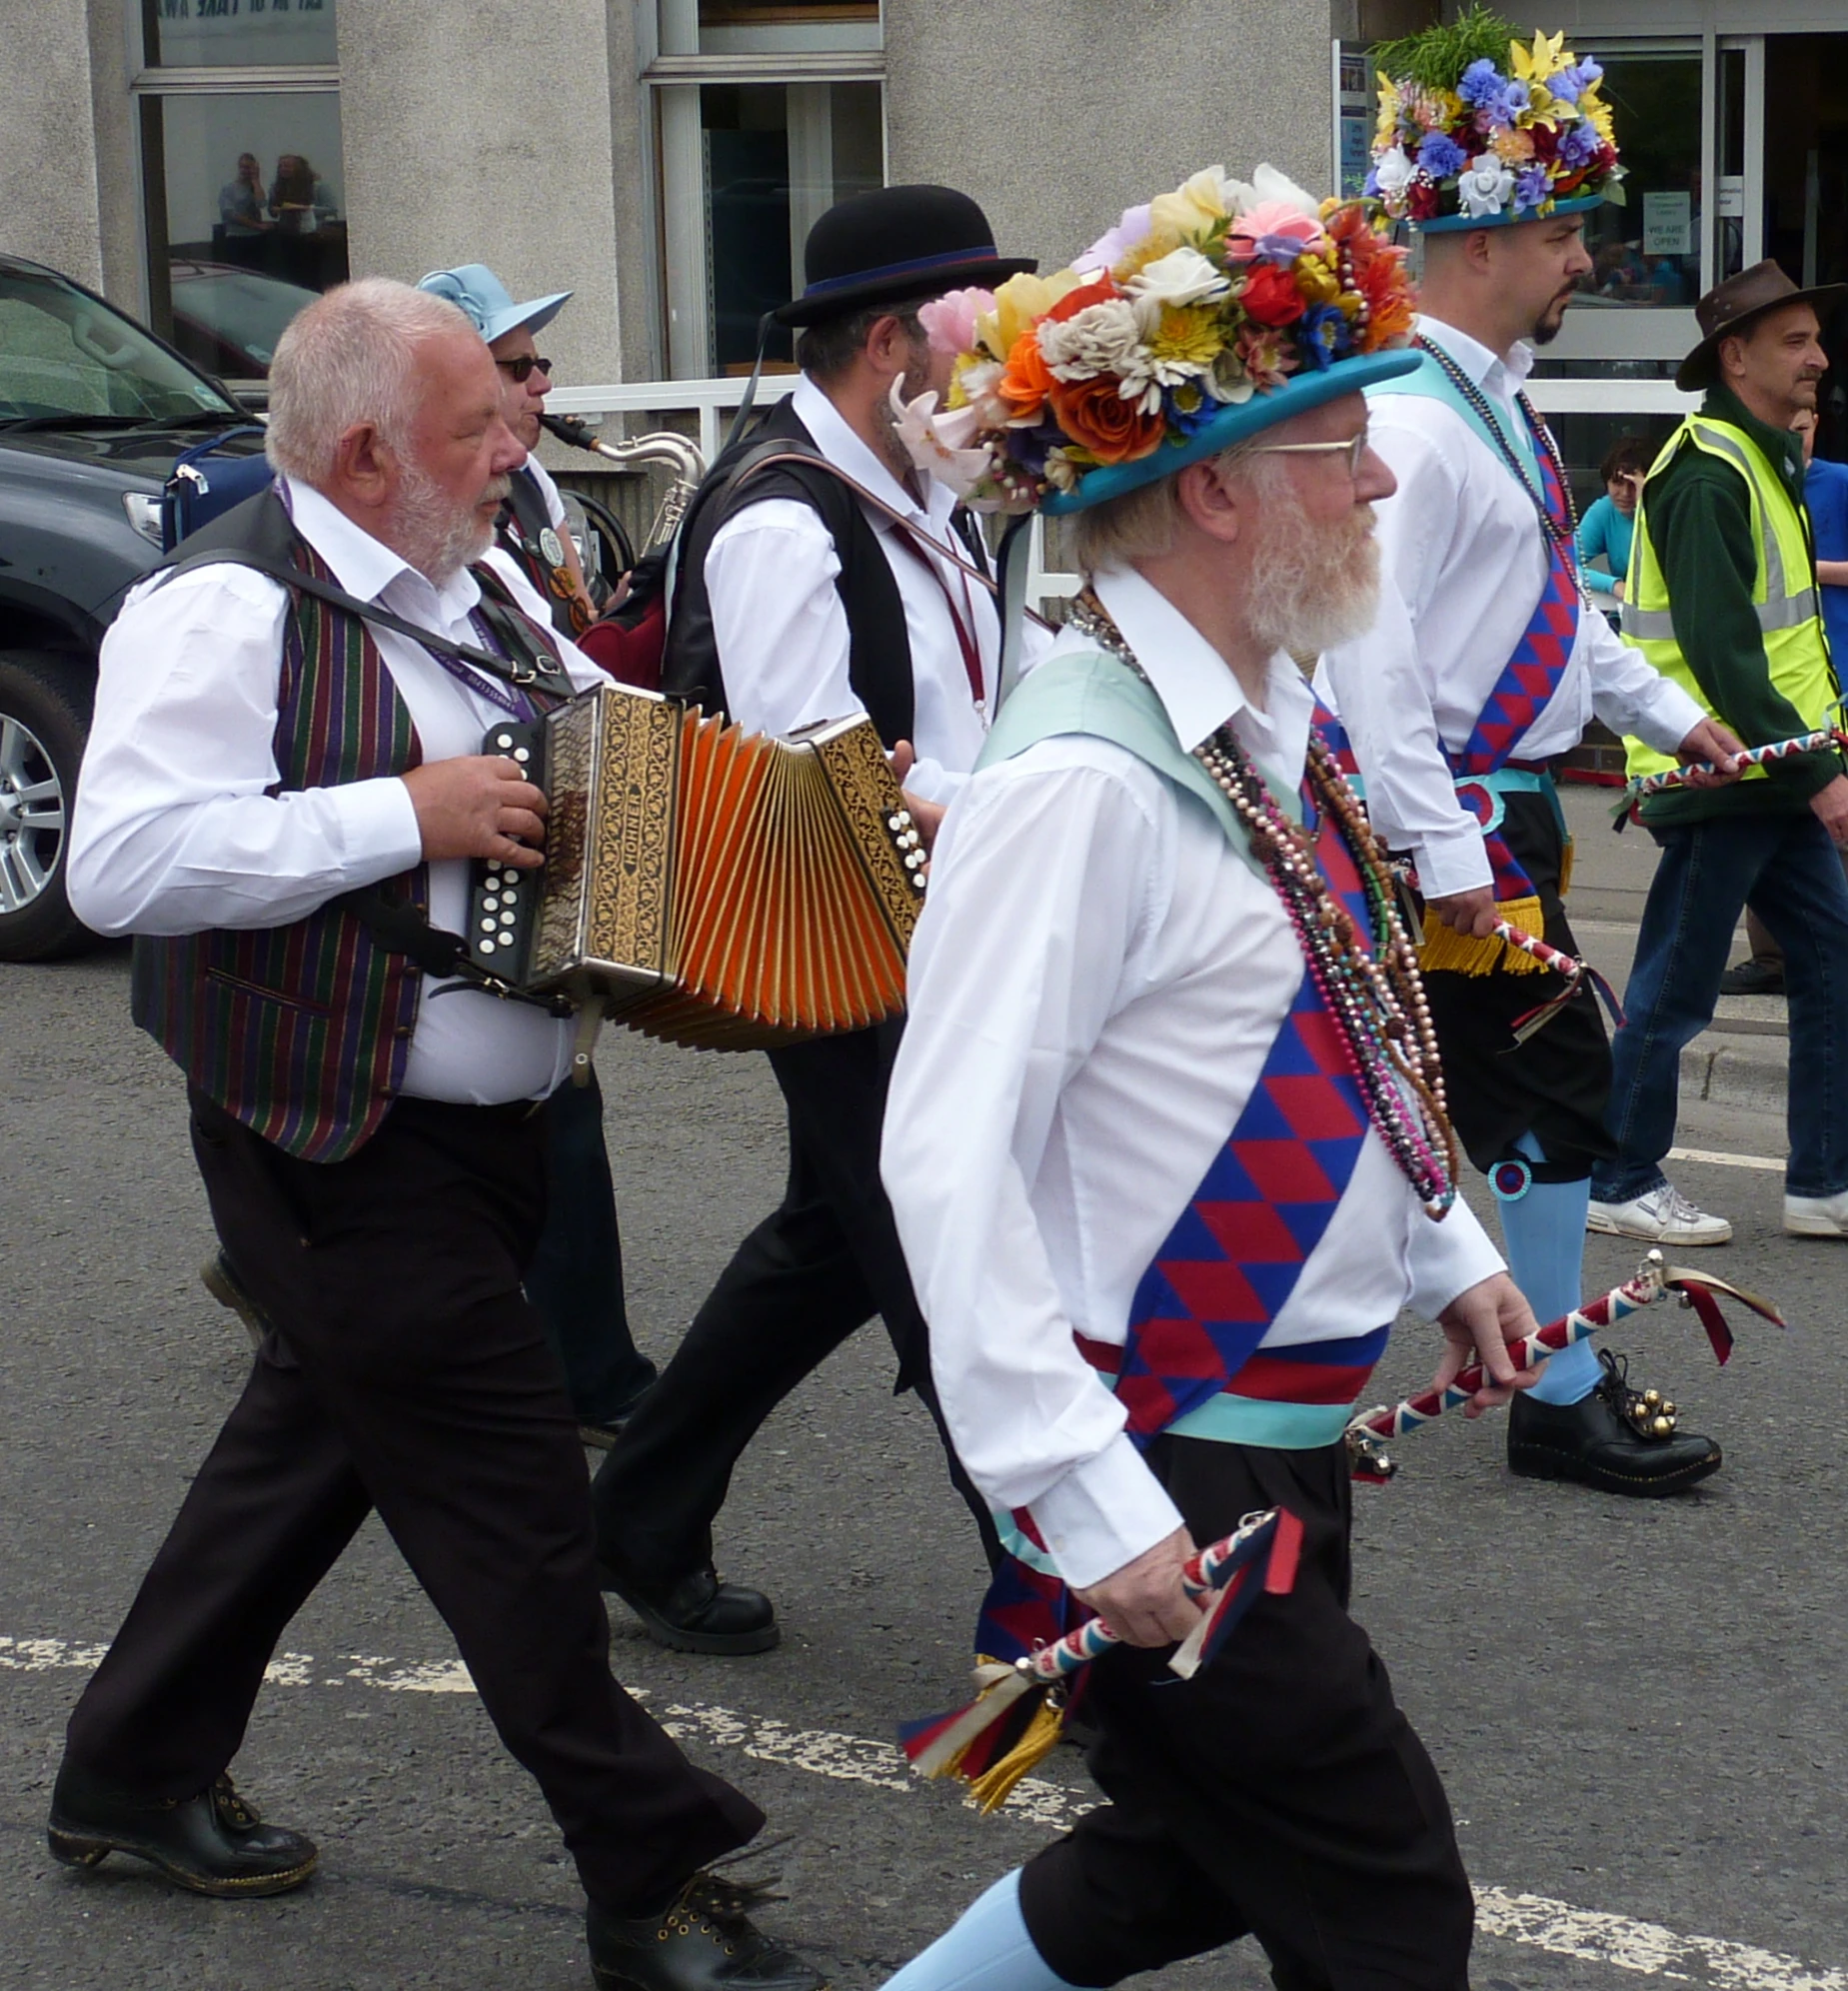 an old man walking down the road with some accordions and wearing some costumes